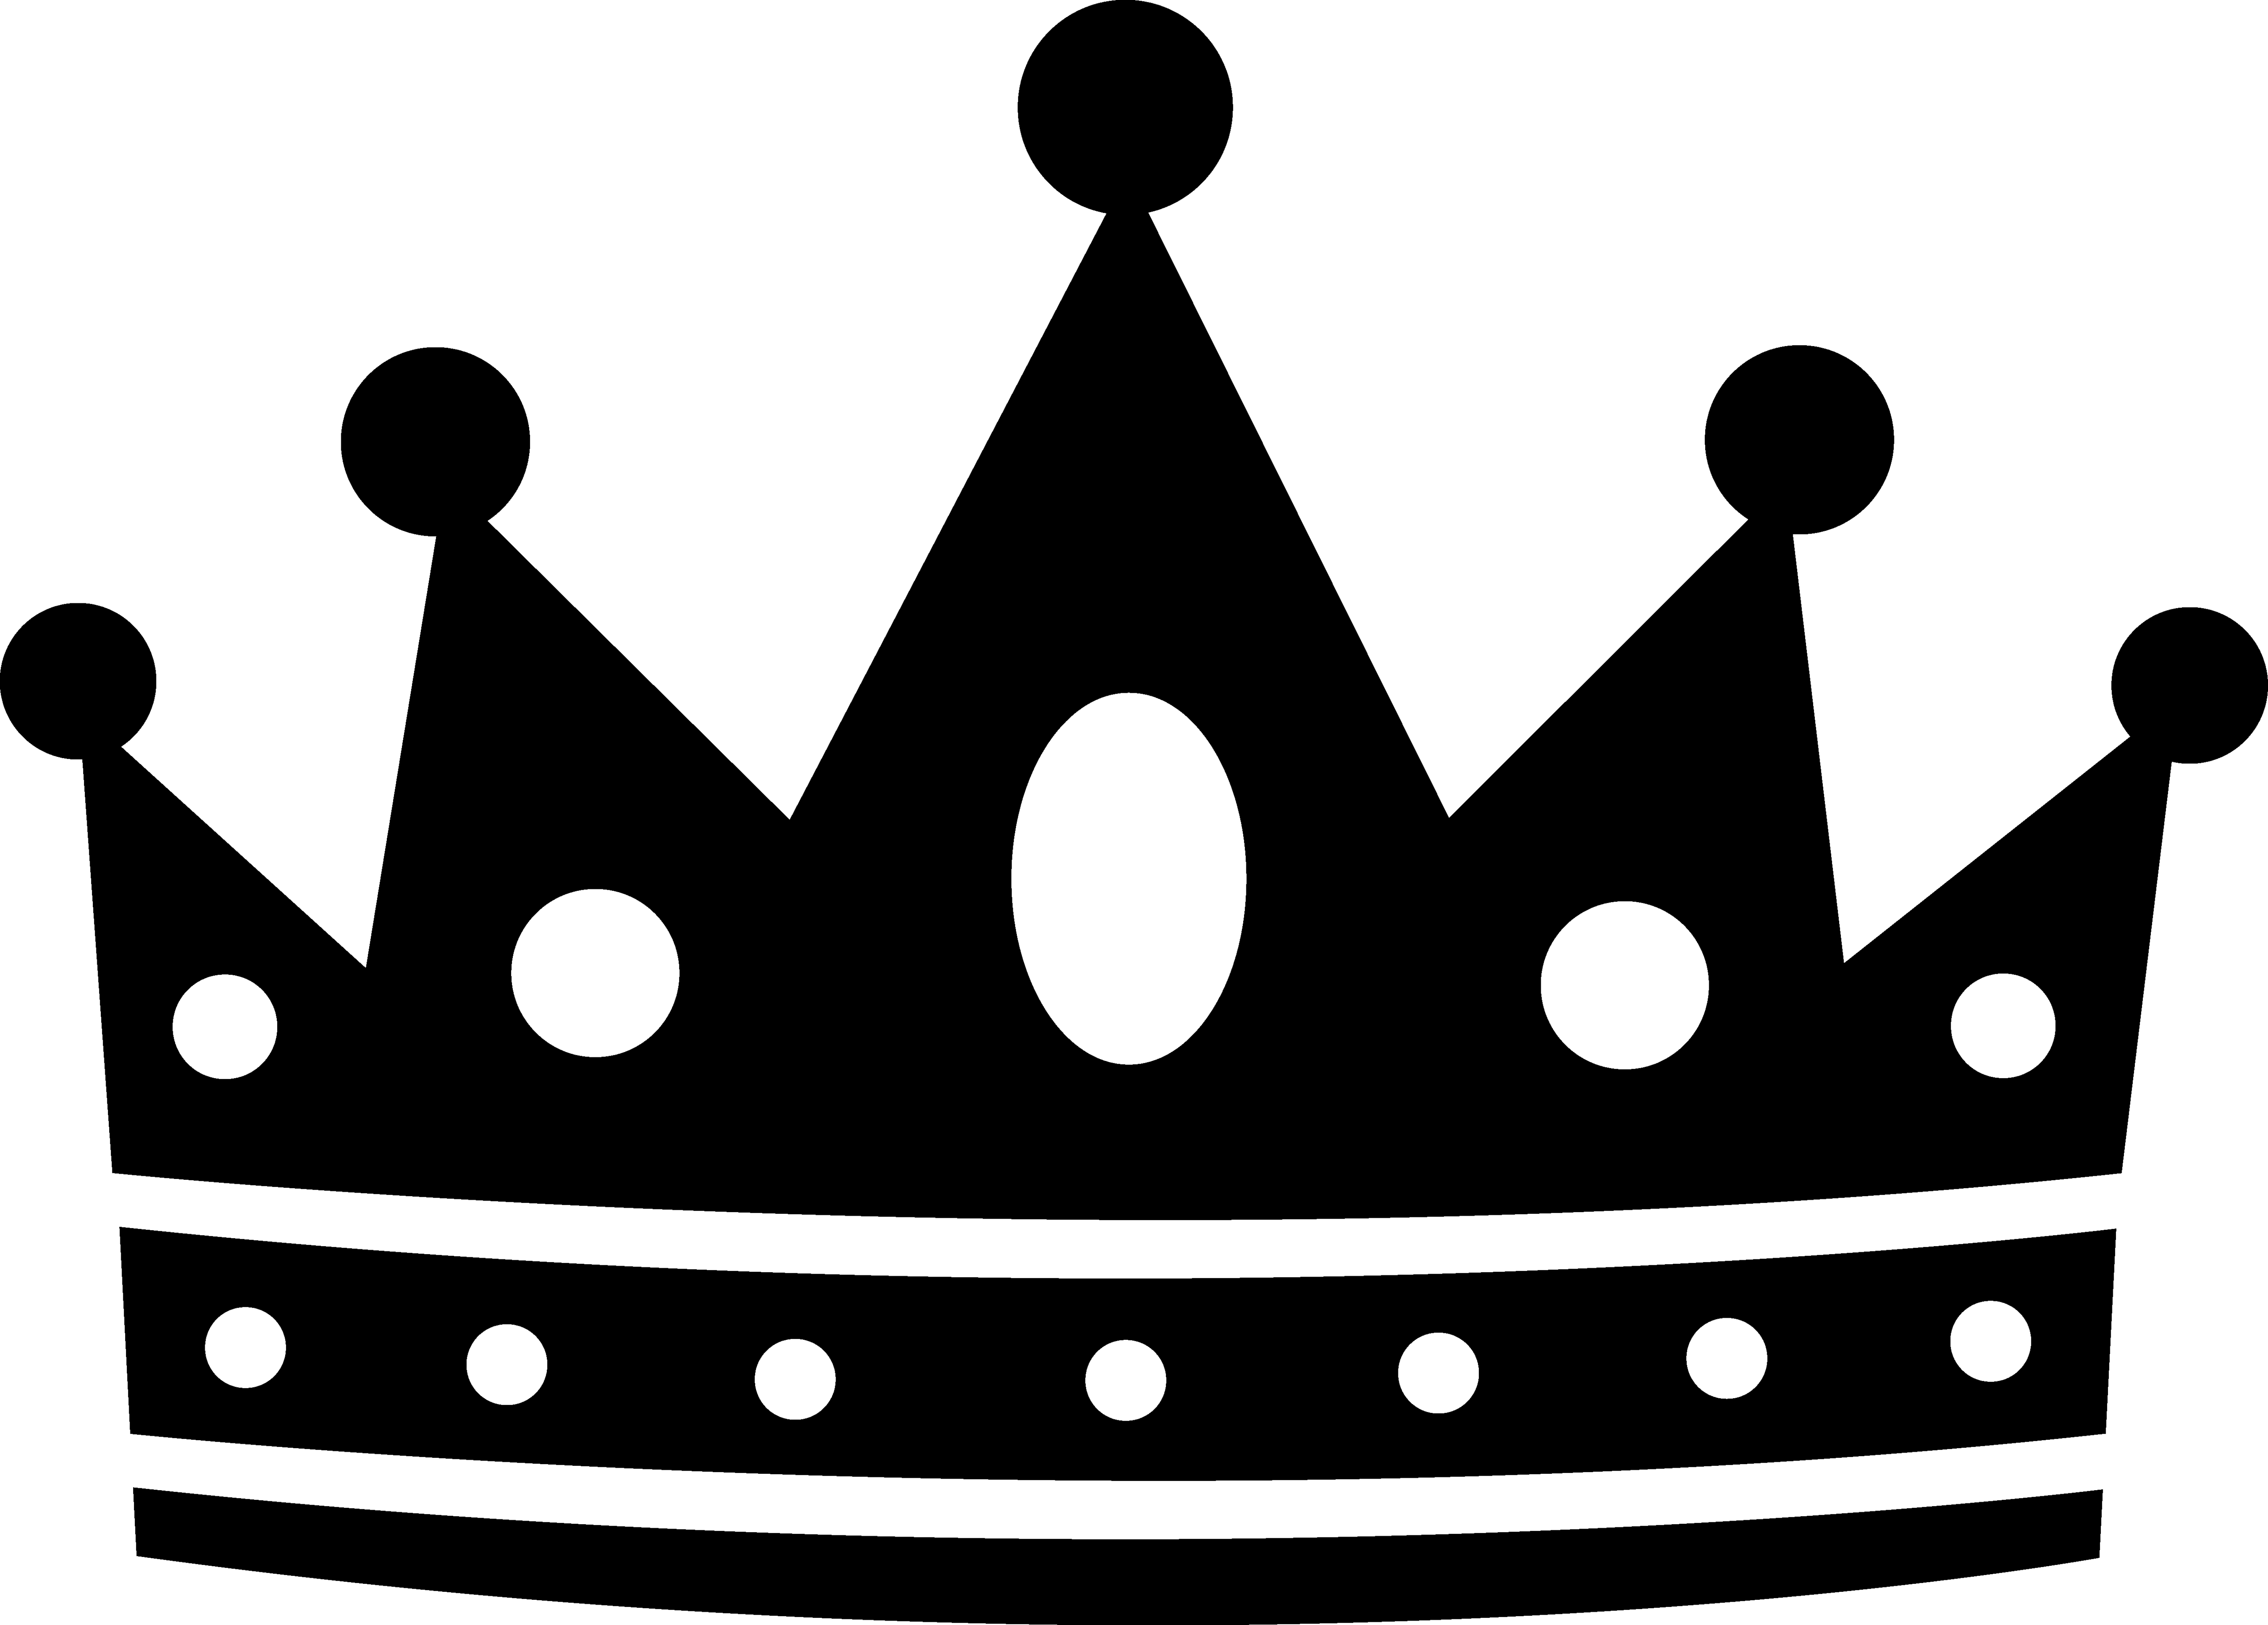 Whisper clipart black and white. Kings crown png hd